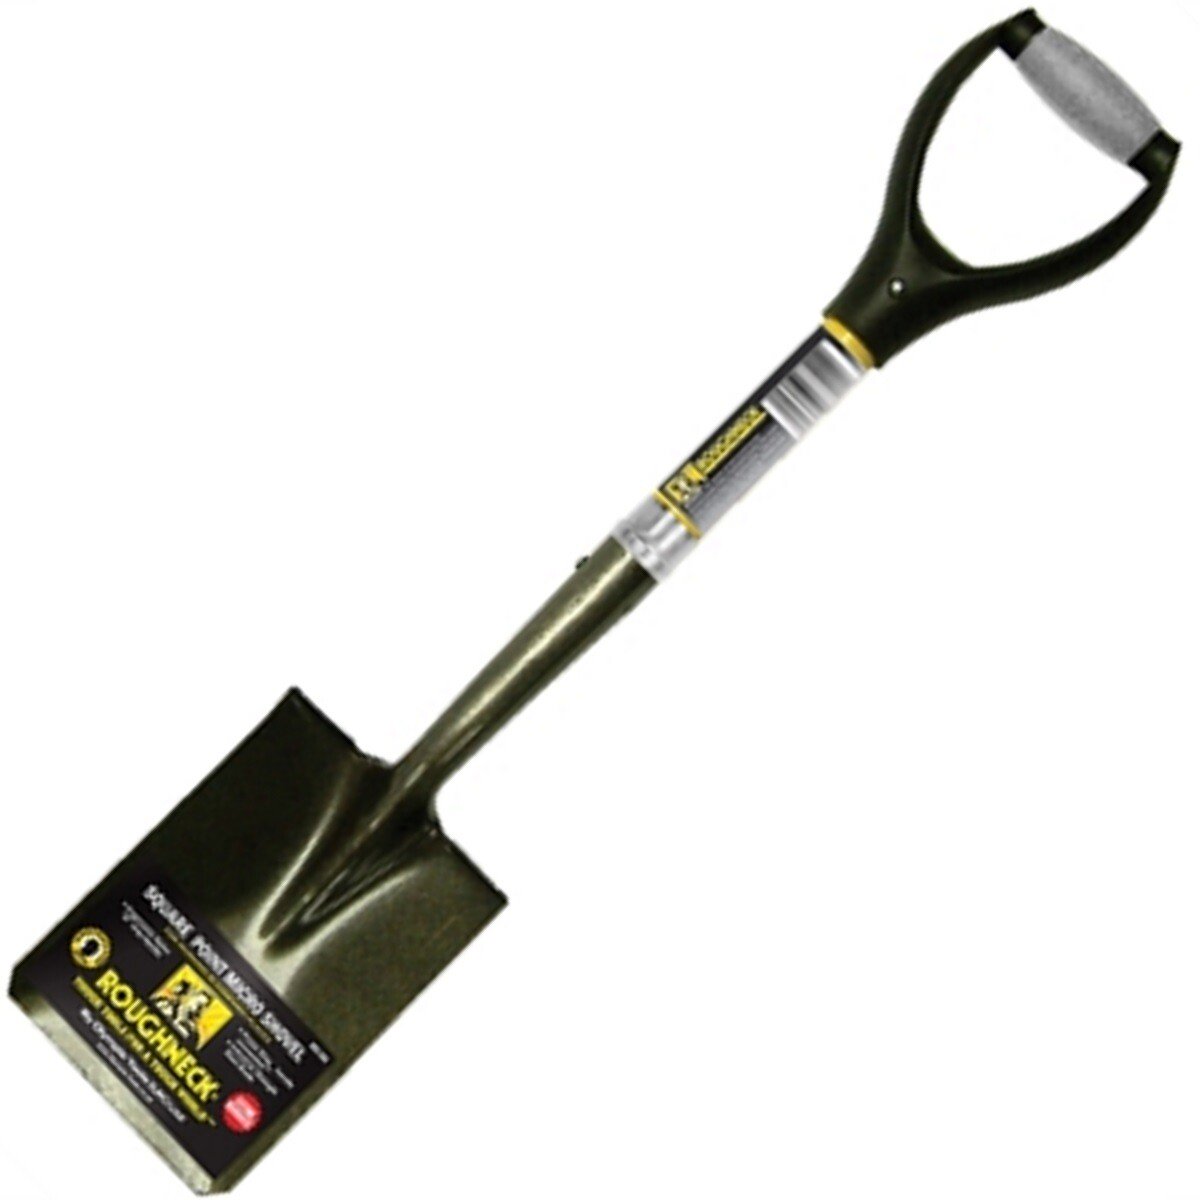 Roughneck 68-006 Micro Shovel Square Point 685mm (27in) Handle ROU68006